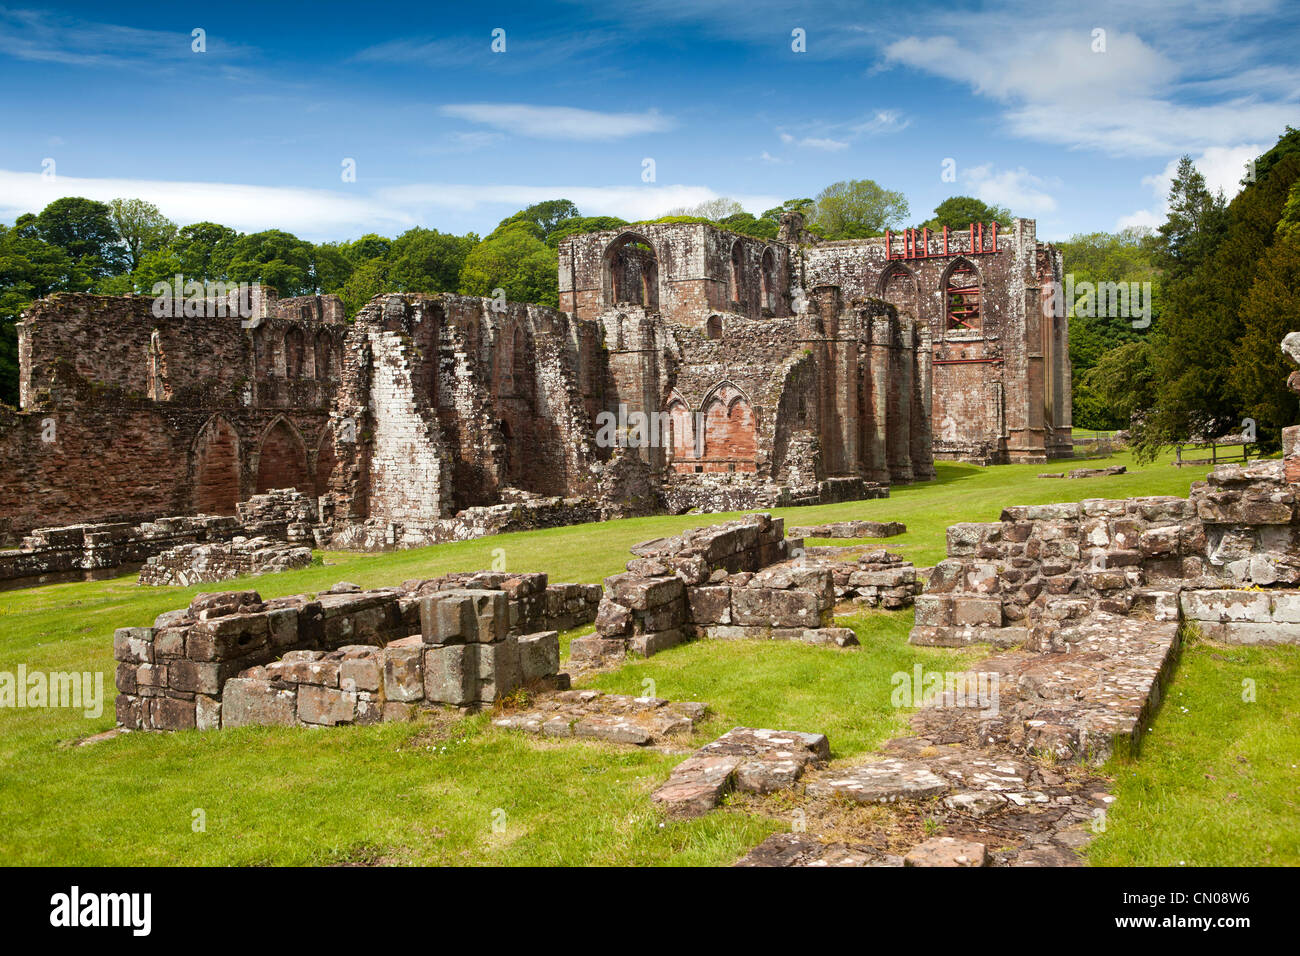 UK, Cumbria, Barrow in Furness, Furness Abbey, ruins of former Cistercian Monastery Stock Photo